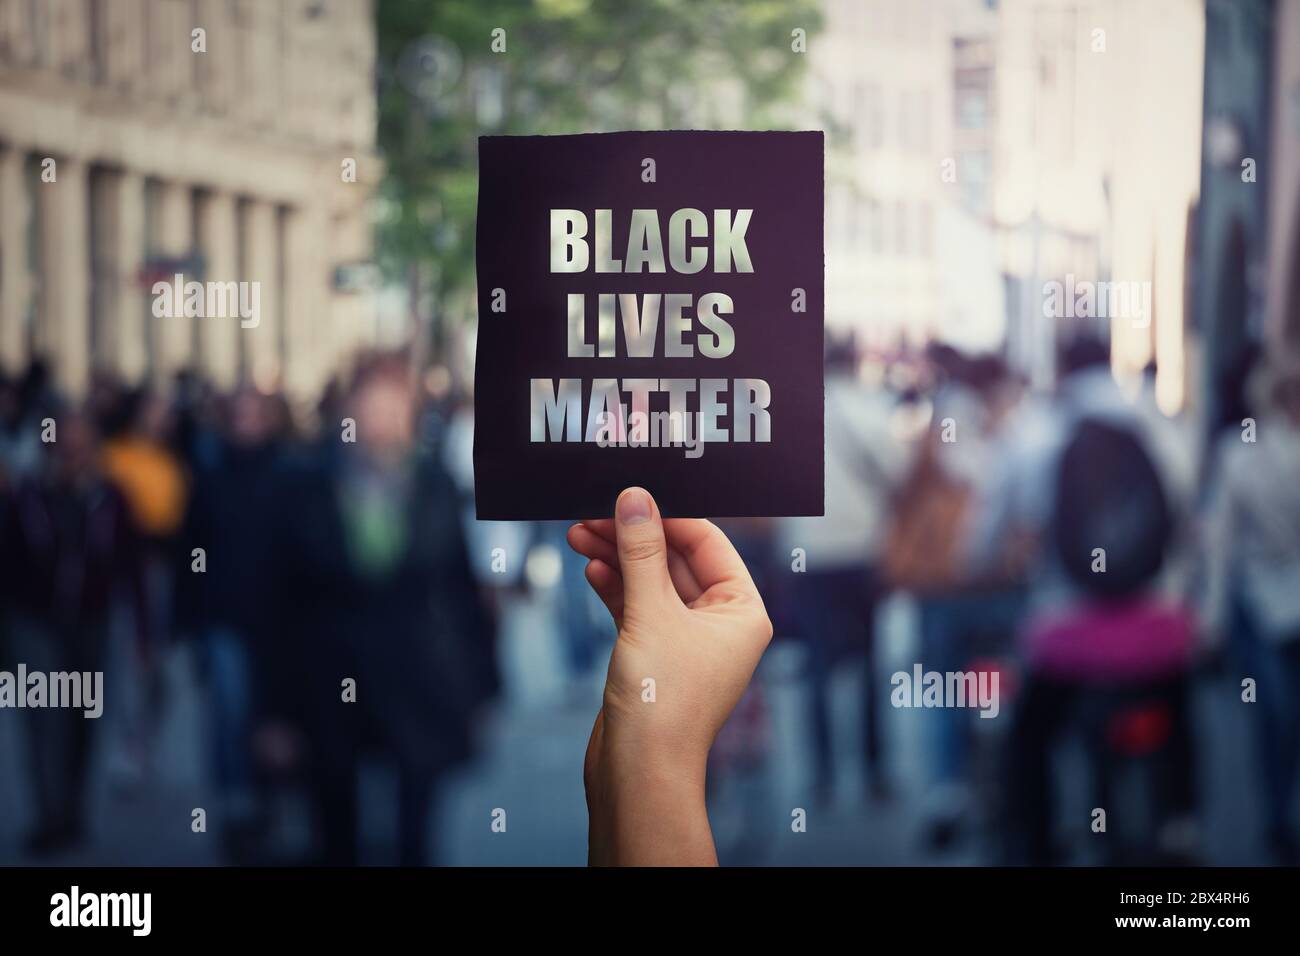 Black Lives Matter, street demonstration. Human hand holds a dark protest banner, against injustice. USA black people rights, social problems concept, Stock Photo